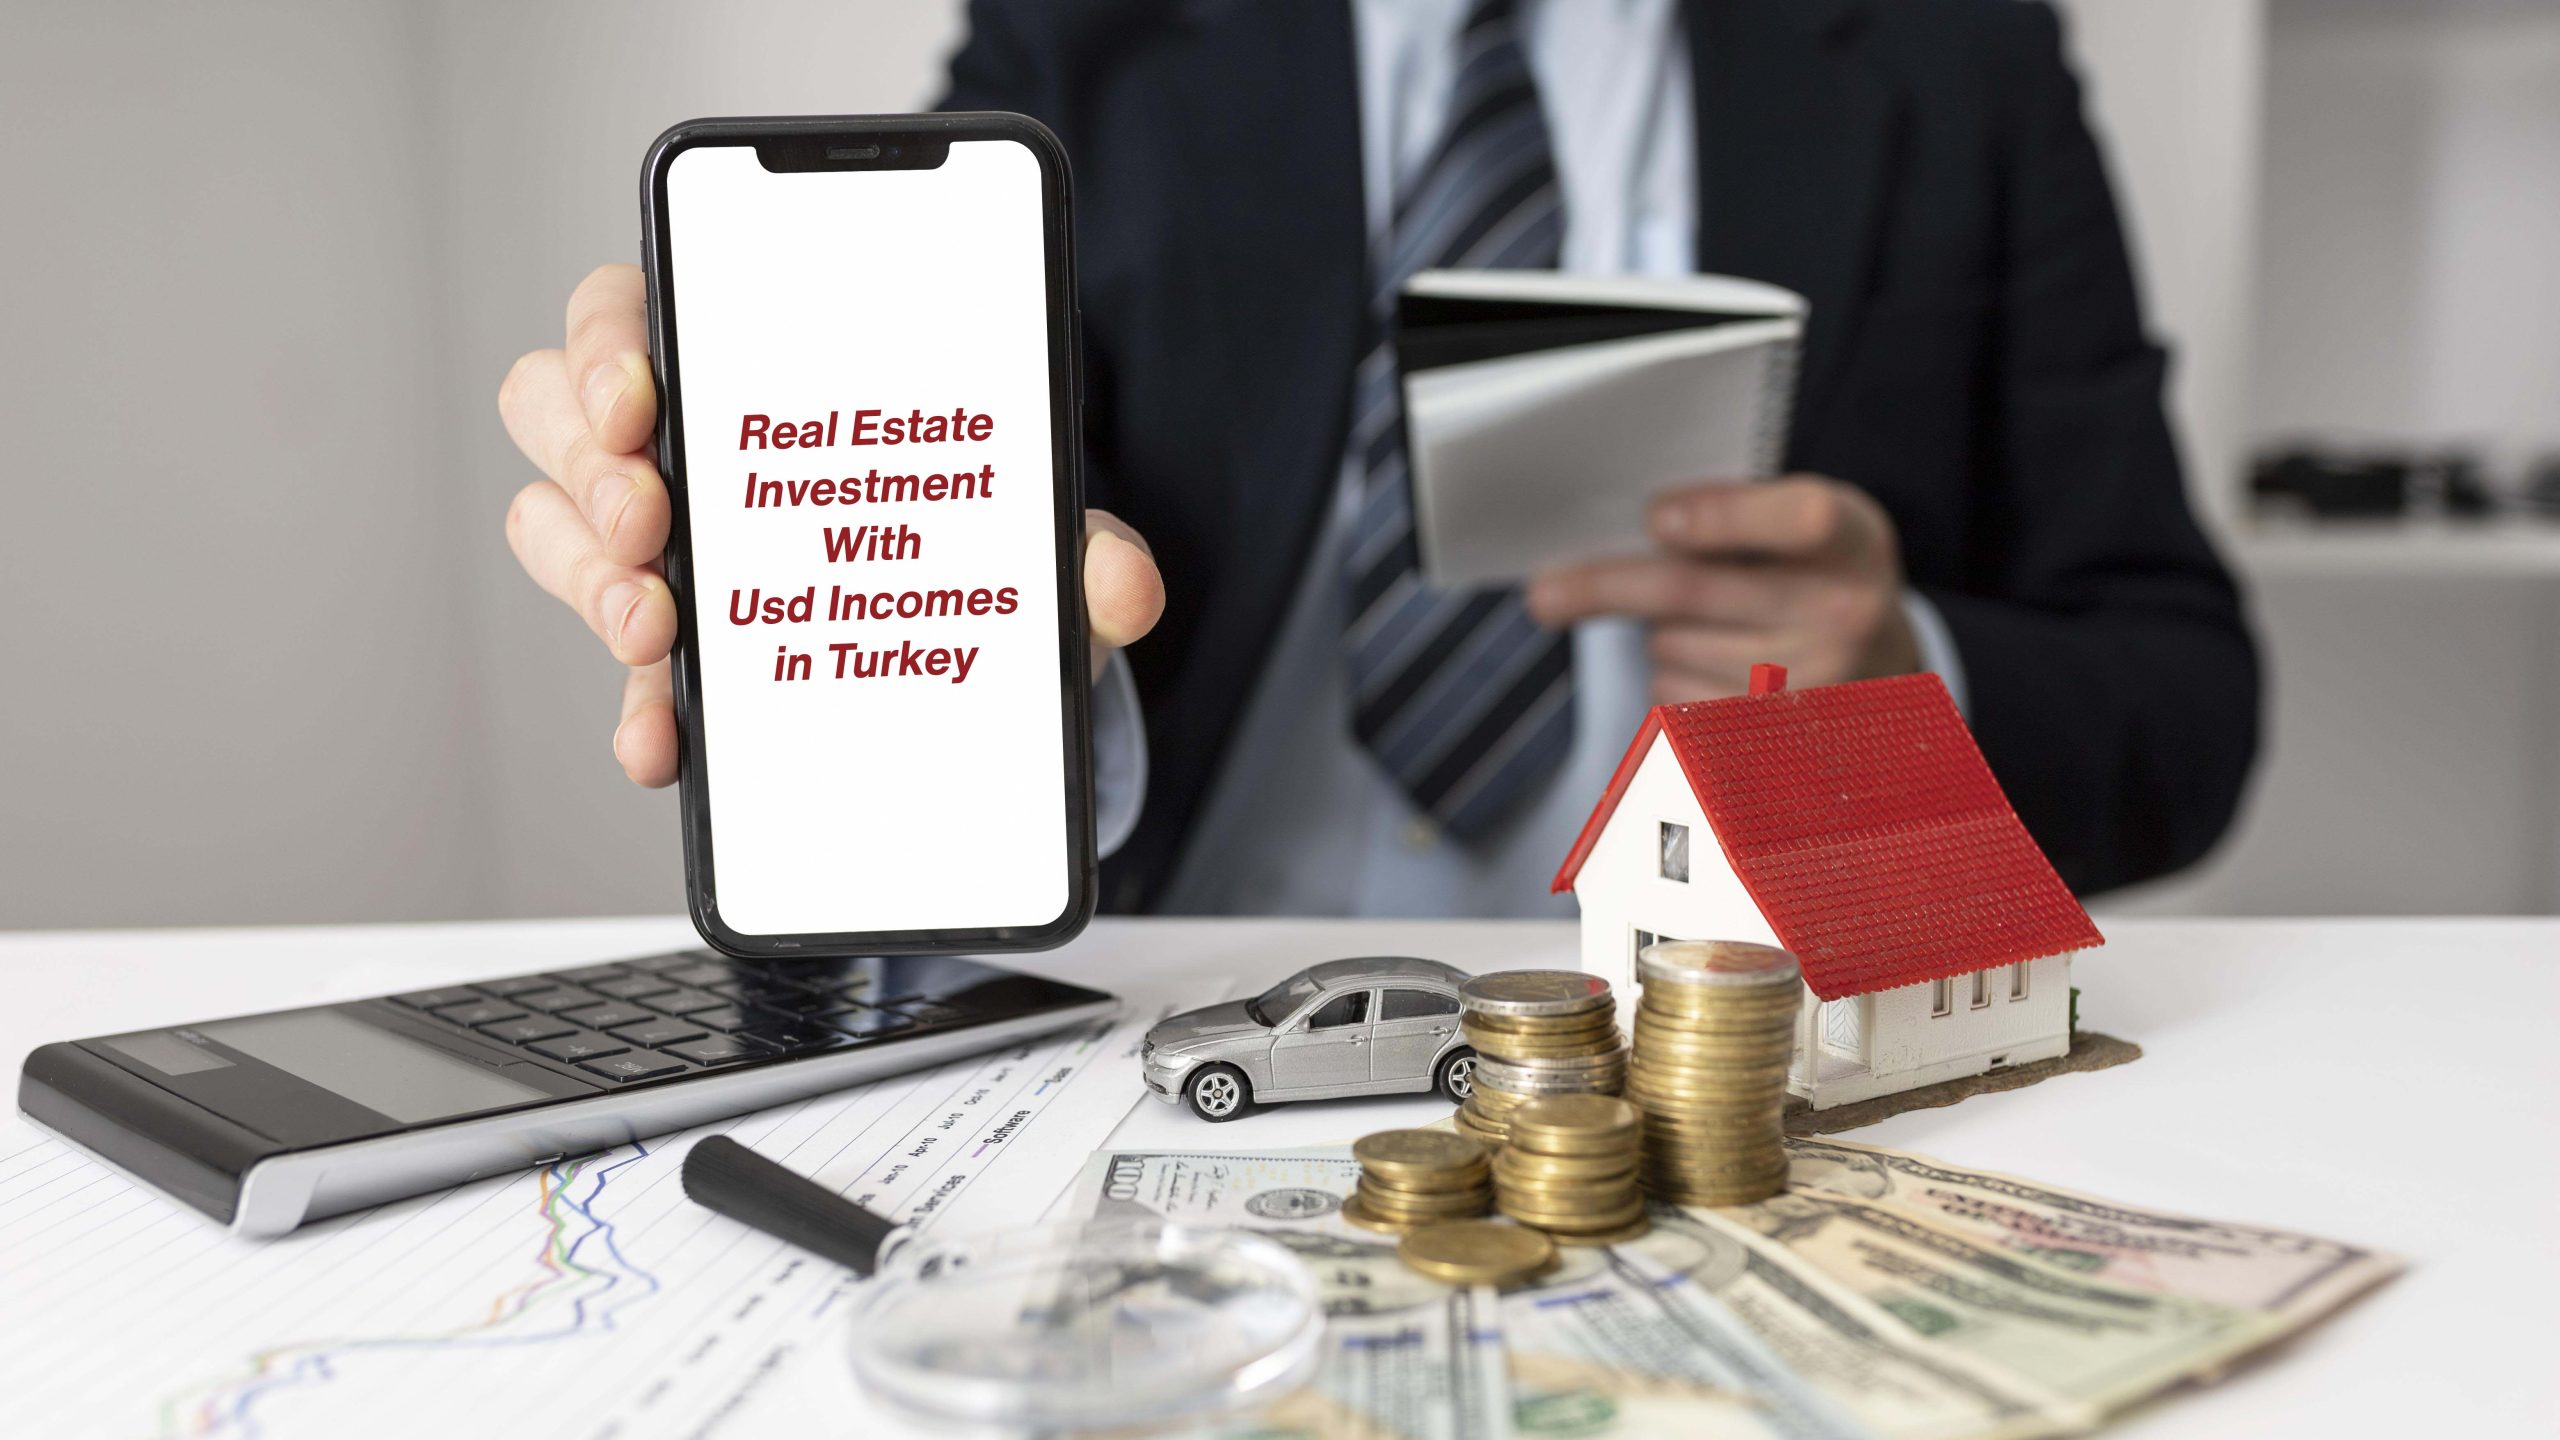 Real Estate Investment With Usd Incomes in Turkey scaled